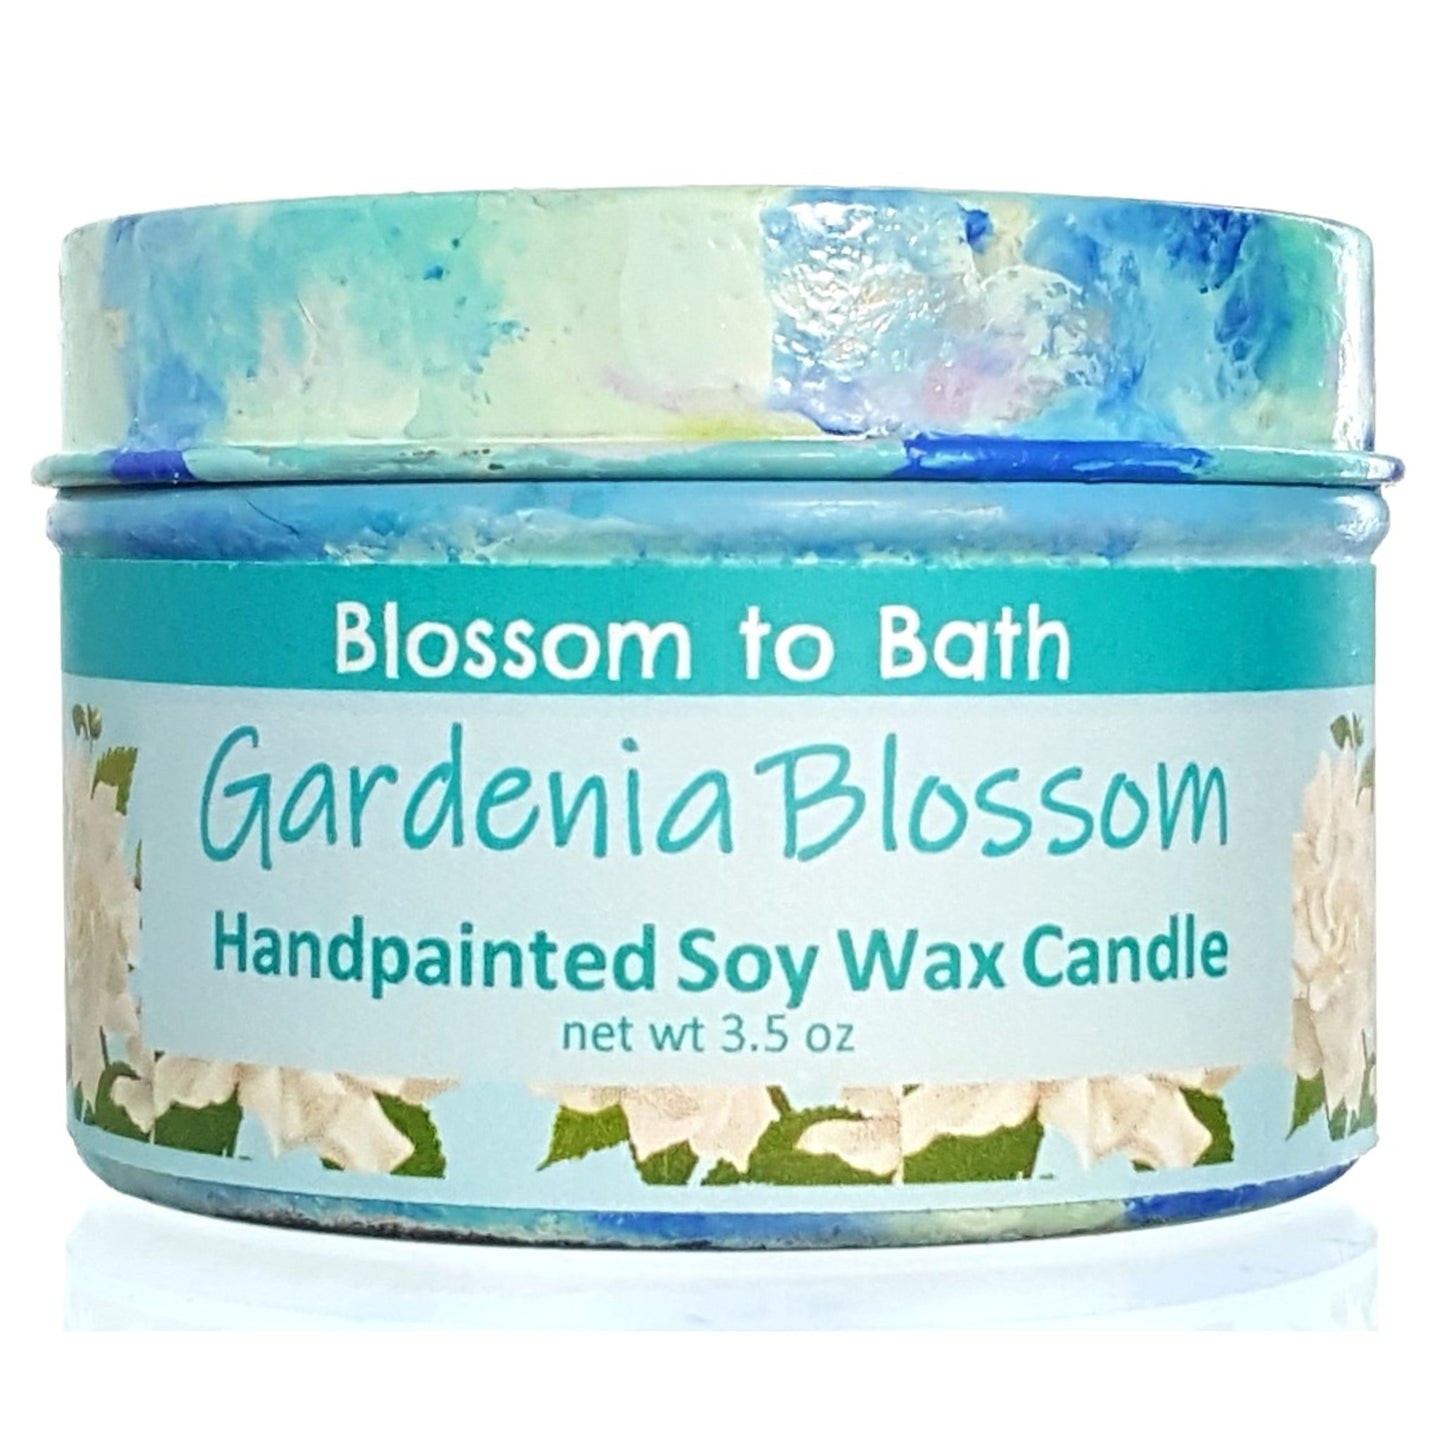 Buy Blossom to Bath Gardenia Blossom Handpainted Soy Wax Candle from Flowersong Soap Studio.  Enjoy one of a kind décor and fill the air with a charming fragrance that lasts for hours  Sweet Gardenia in a puff of blooming summer flowers